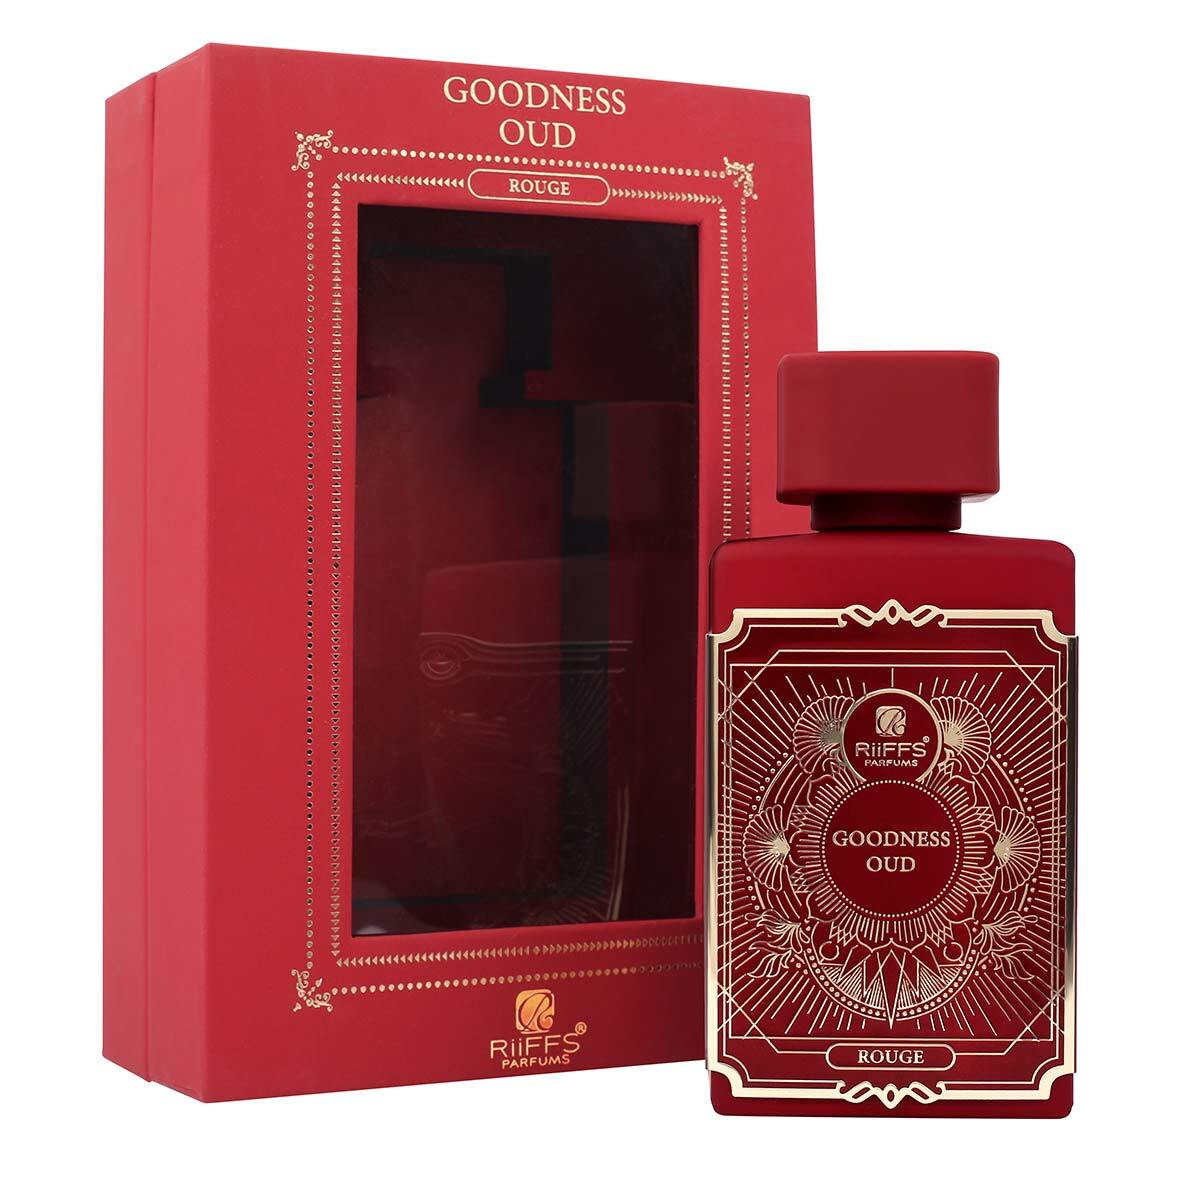 GOODNESS OUD ROUGE